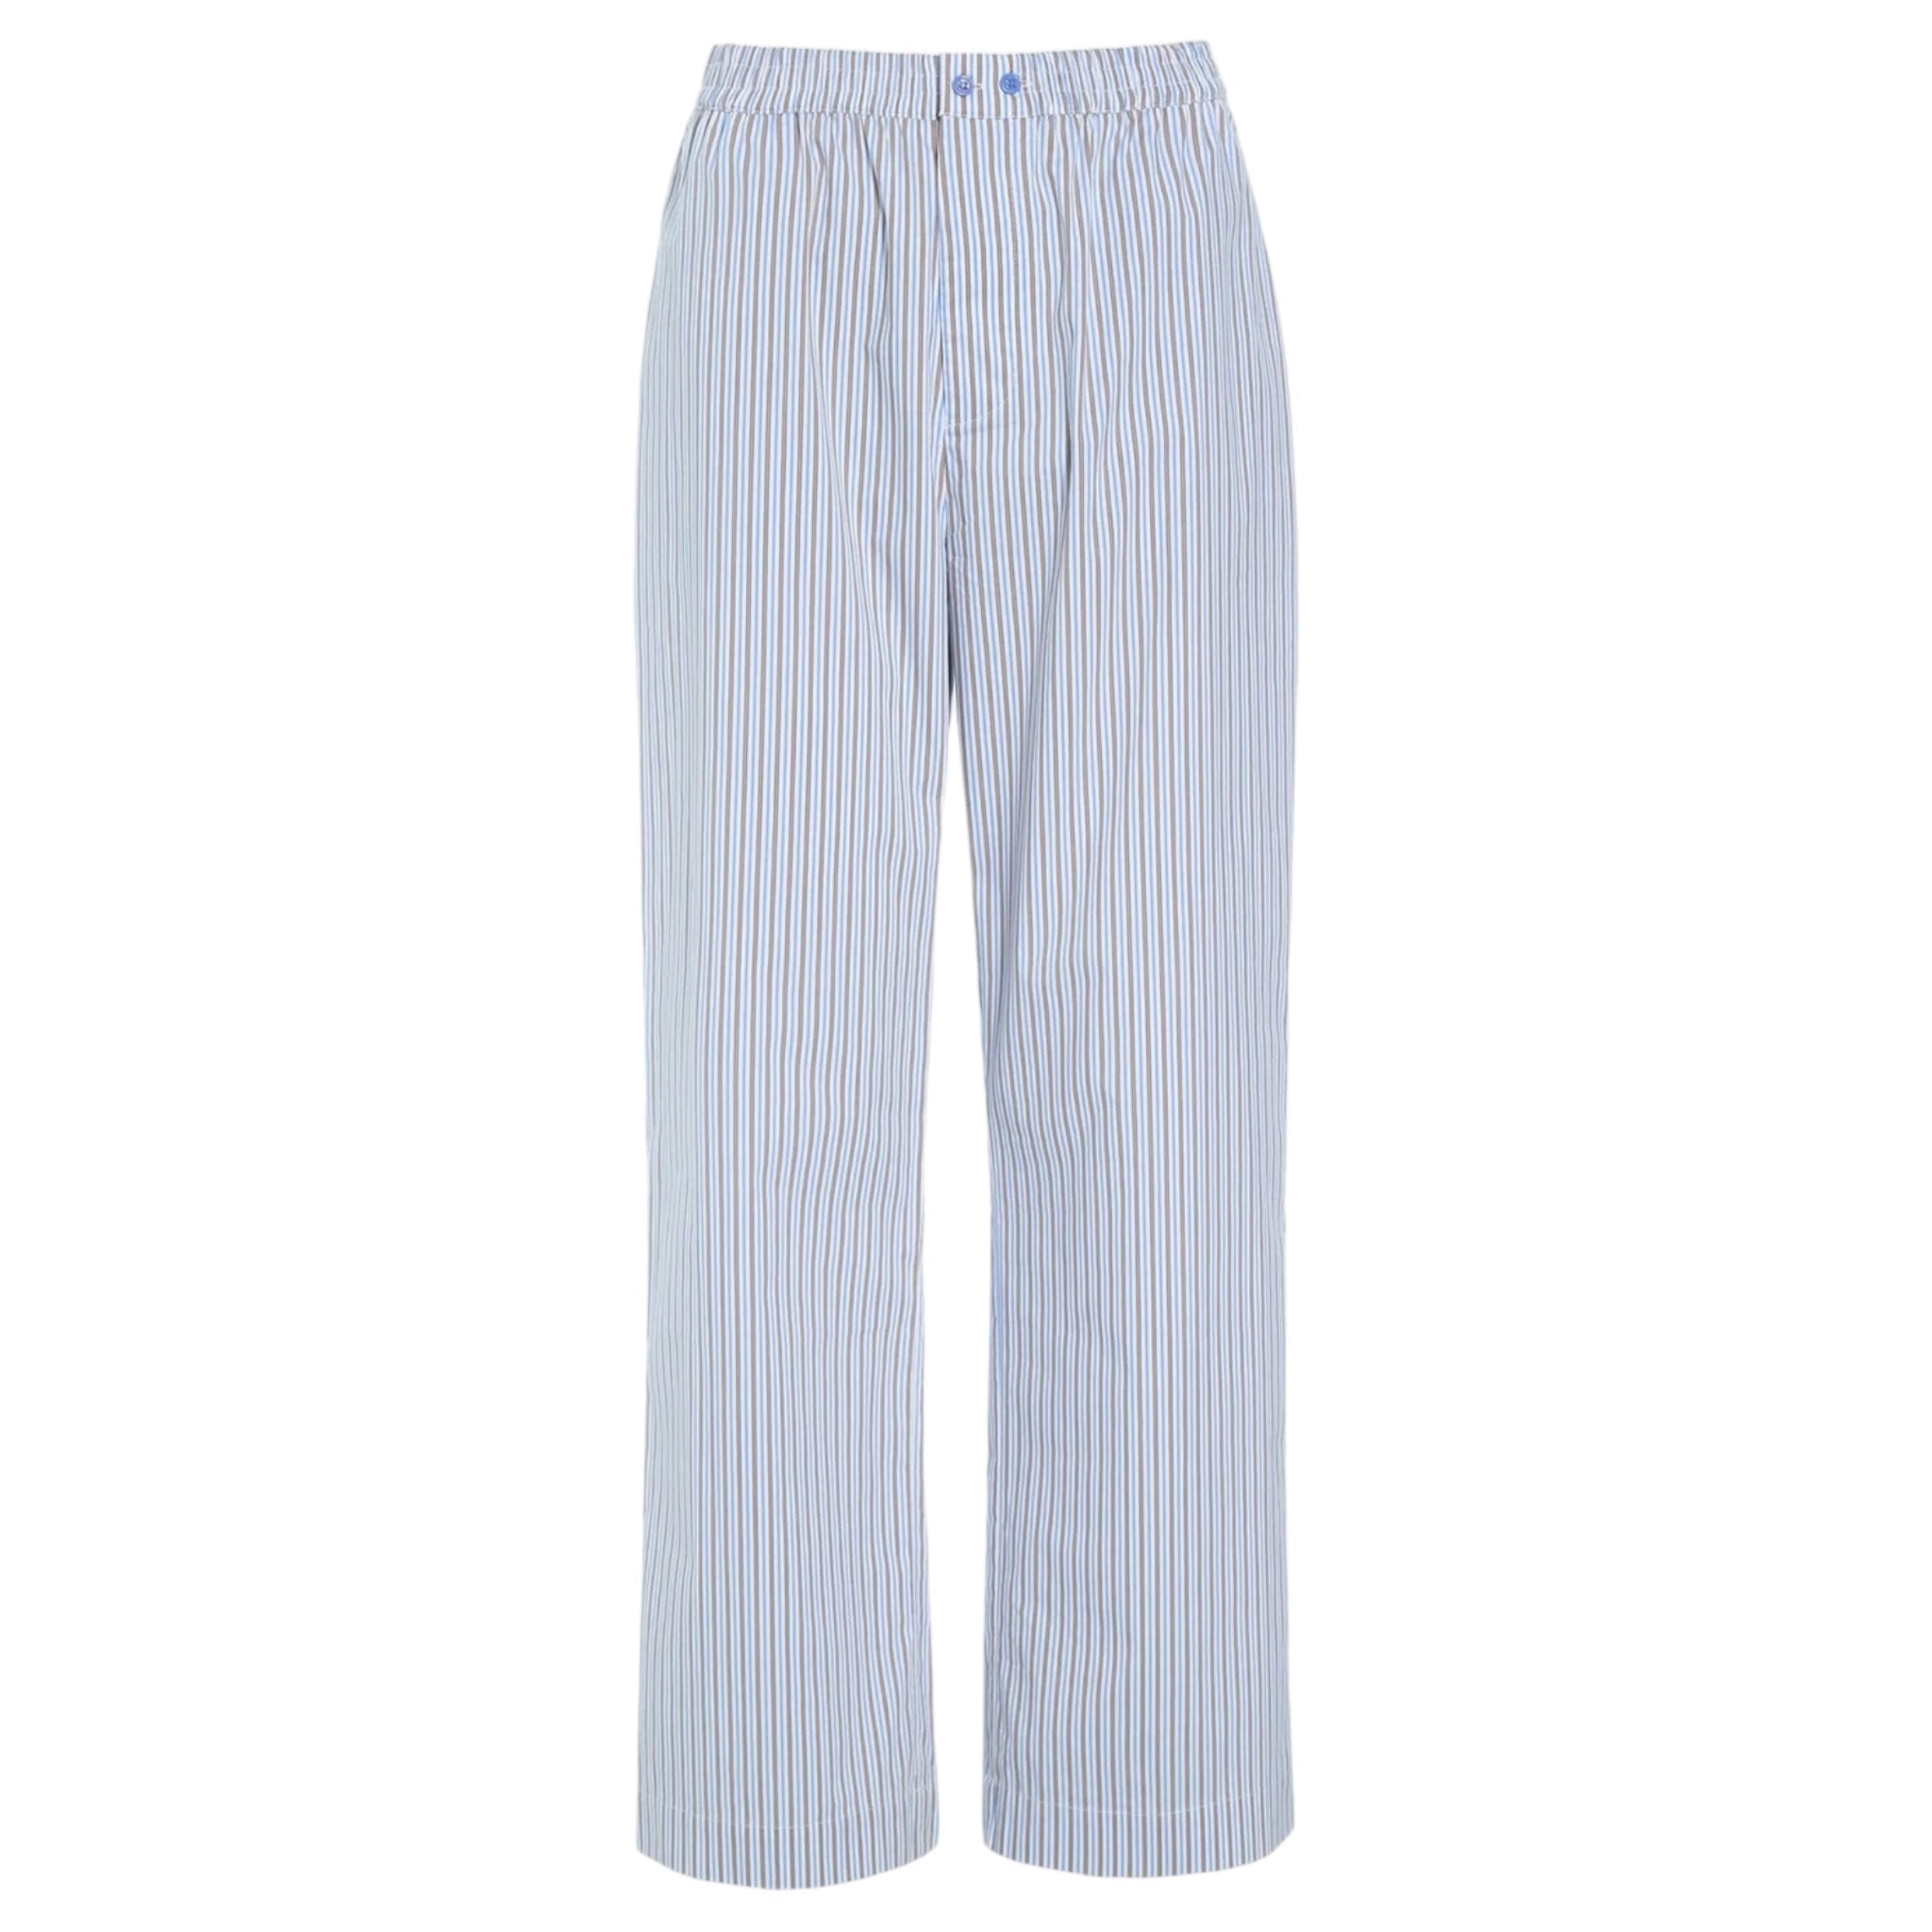 Ollie Striped Pant - Something about Sofia